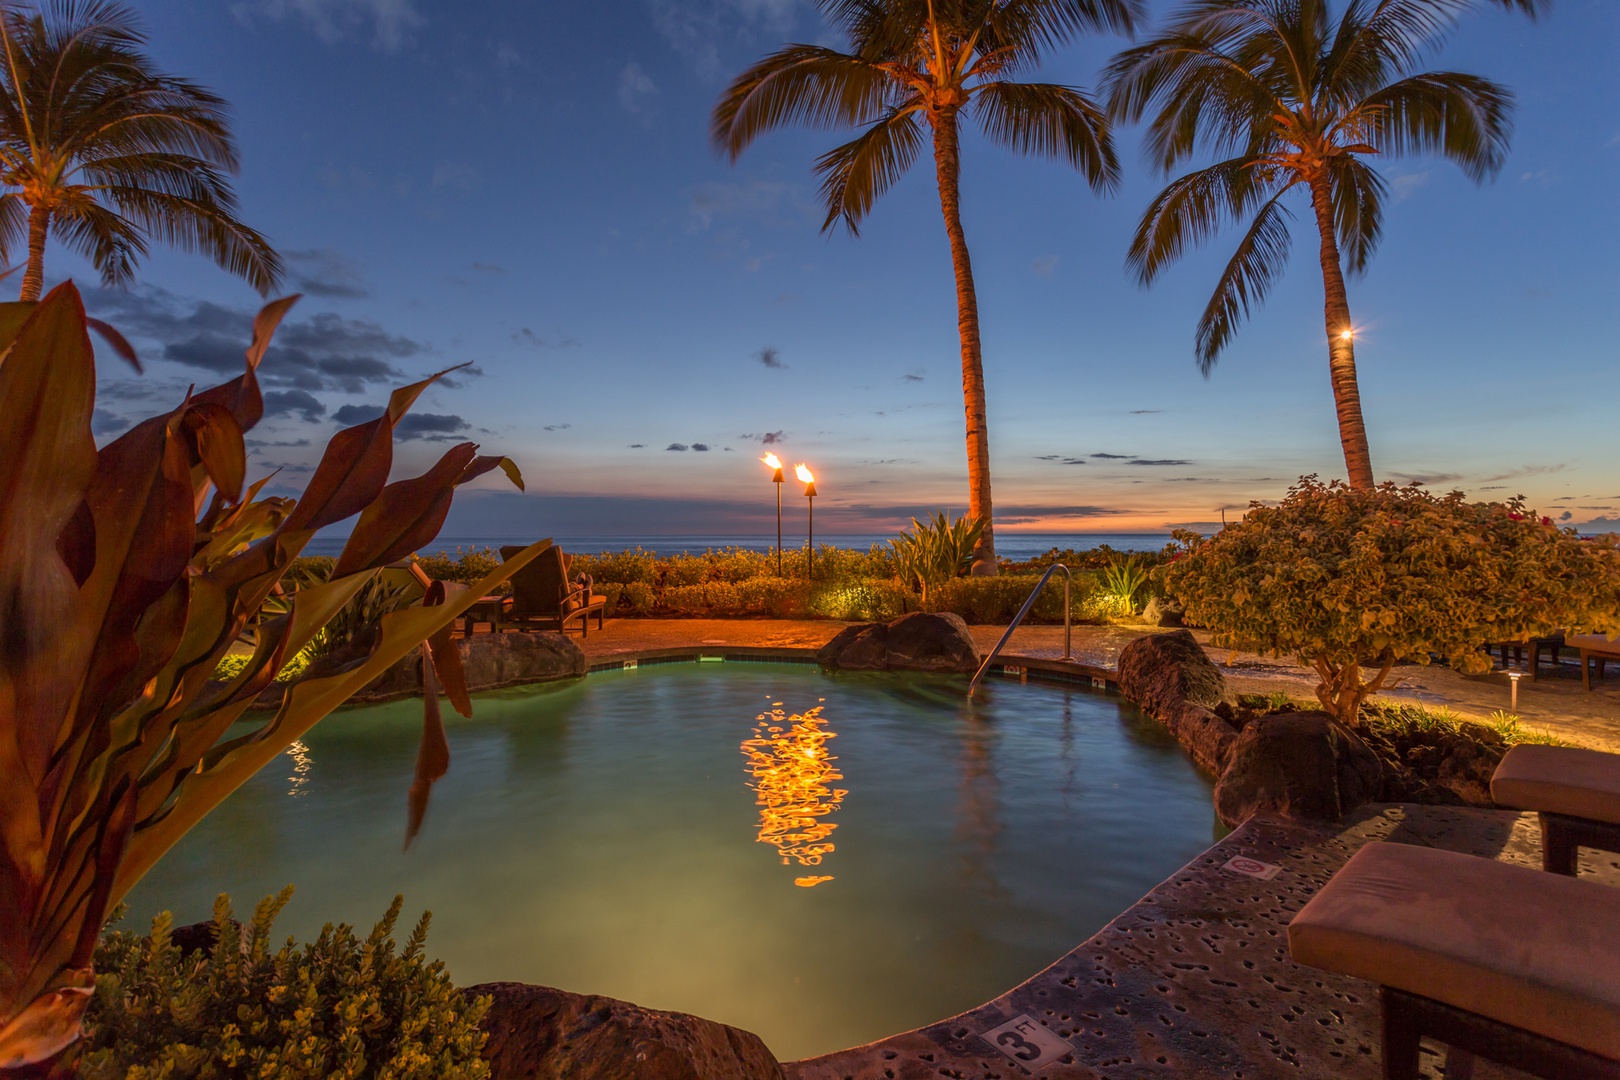 Waikoloa Vacation Rentals, 2BD Hali'i Kai (12C) at Waikoloa Resort - Yet another portion of the pool at twilight - a sand bottom hot tub is also on offer at this fabulous oceanfront amenities center.